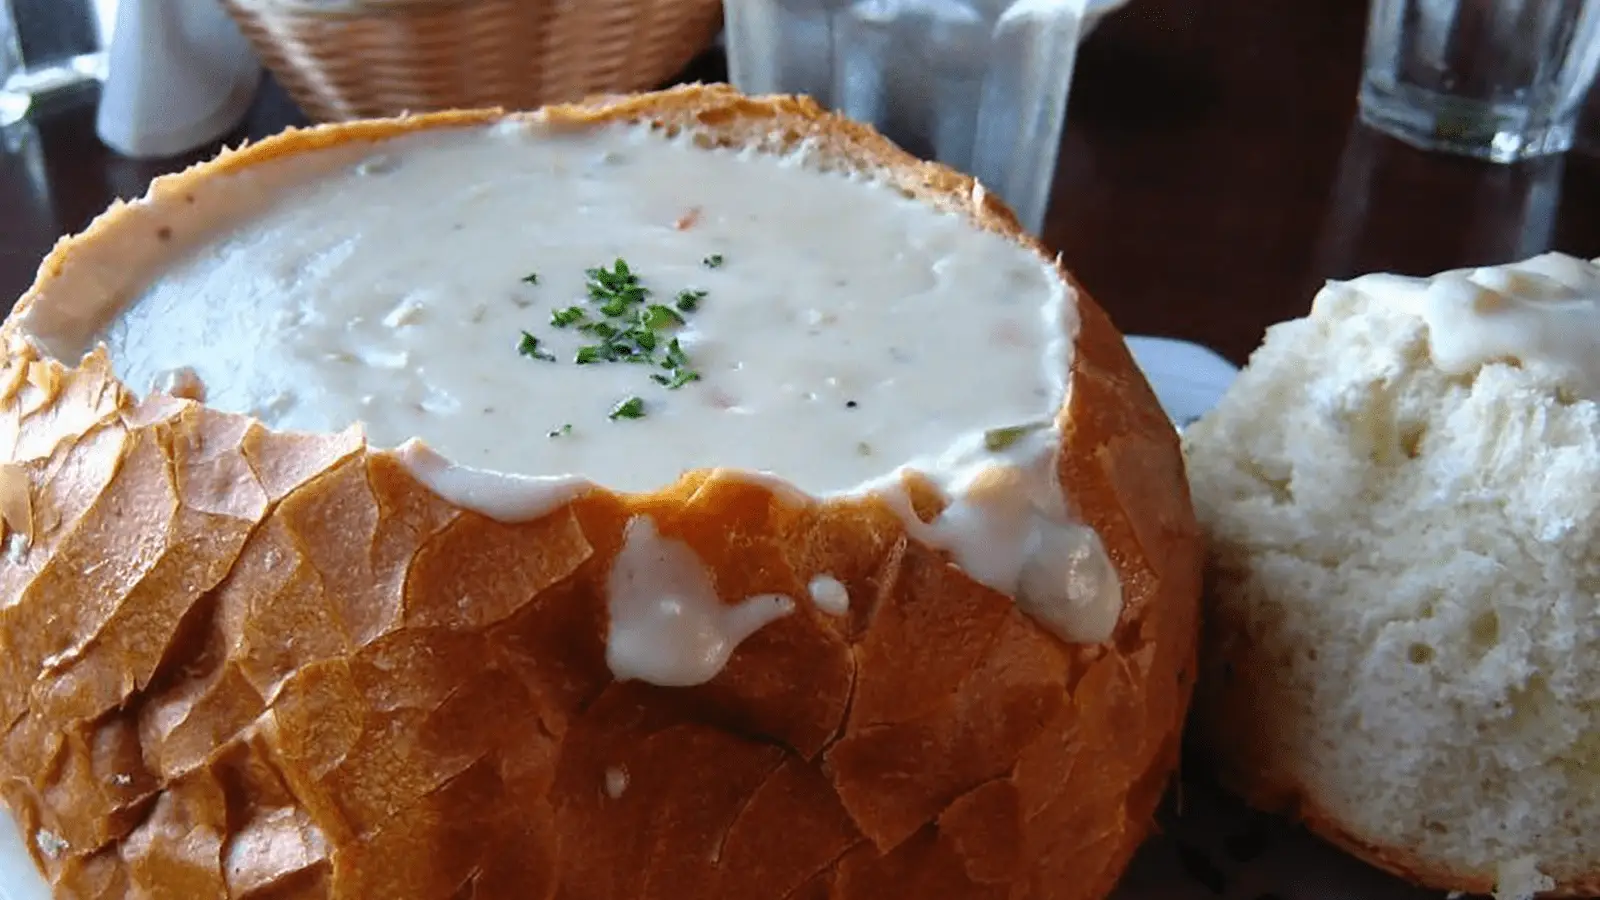 Flahertys-Seafood-Grill-and-Oyster-Bar-Monterey-Peninsula-Clam-Chowder-credit-Flahertys-800x450-1.png